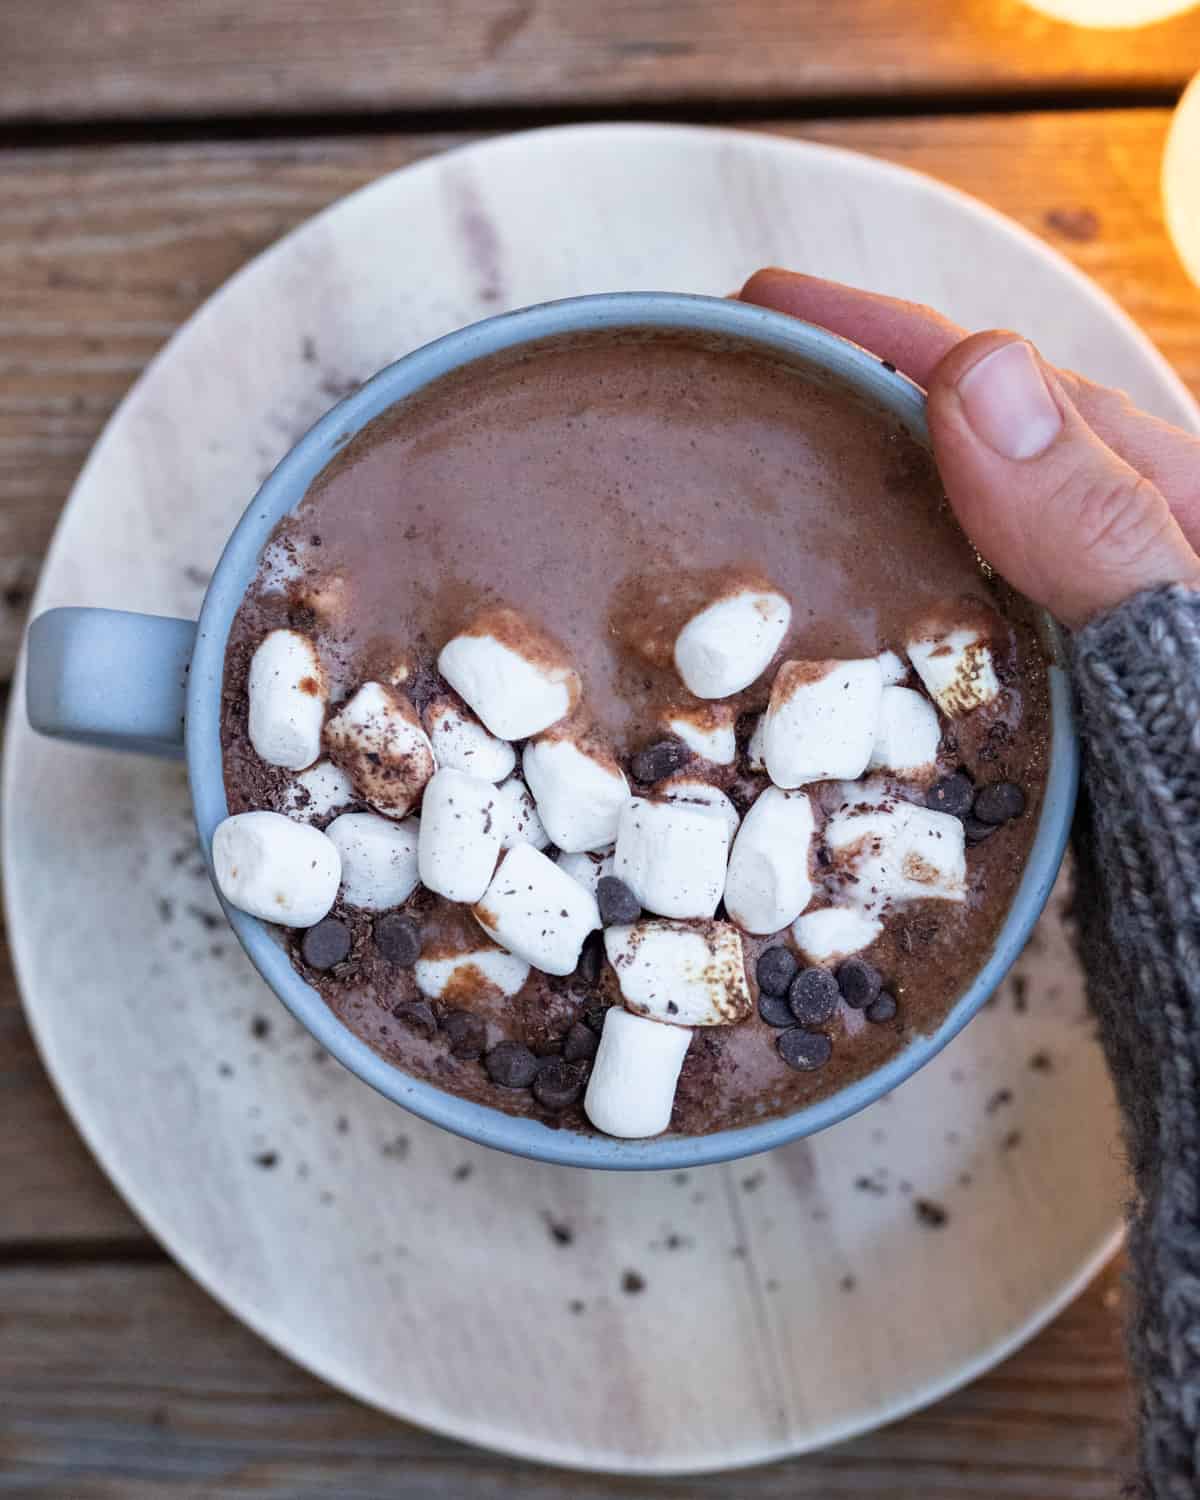 A delicious cup of hot chocolate with marshmallows and chocolate chips, perfect for a cold day, presented on a white plate with a wooden backdrop.